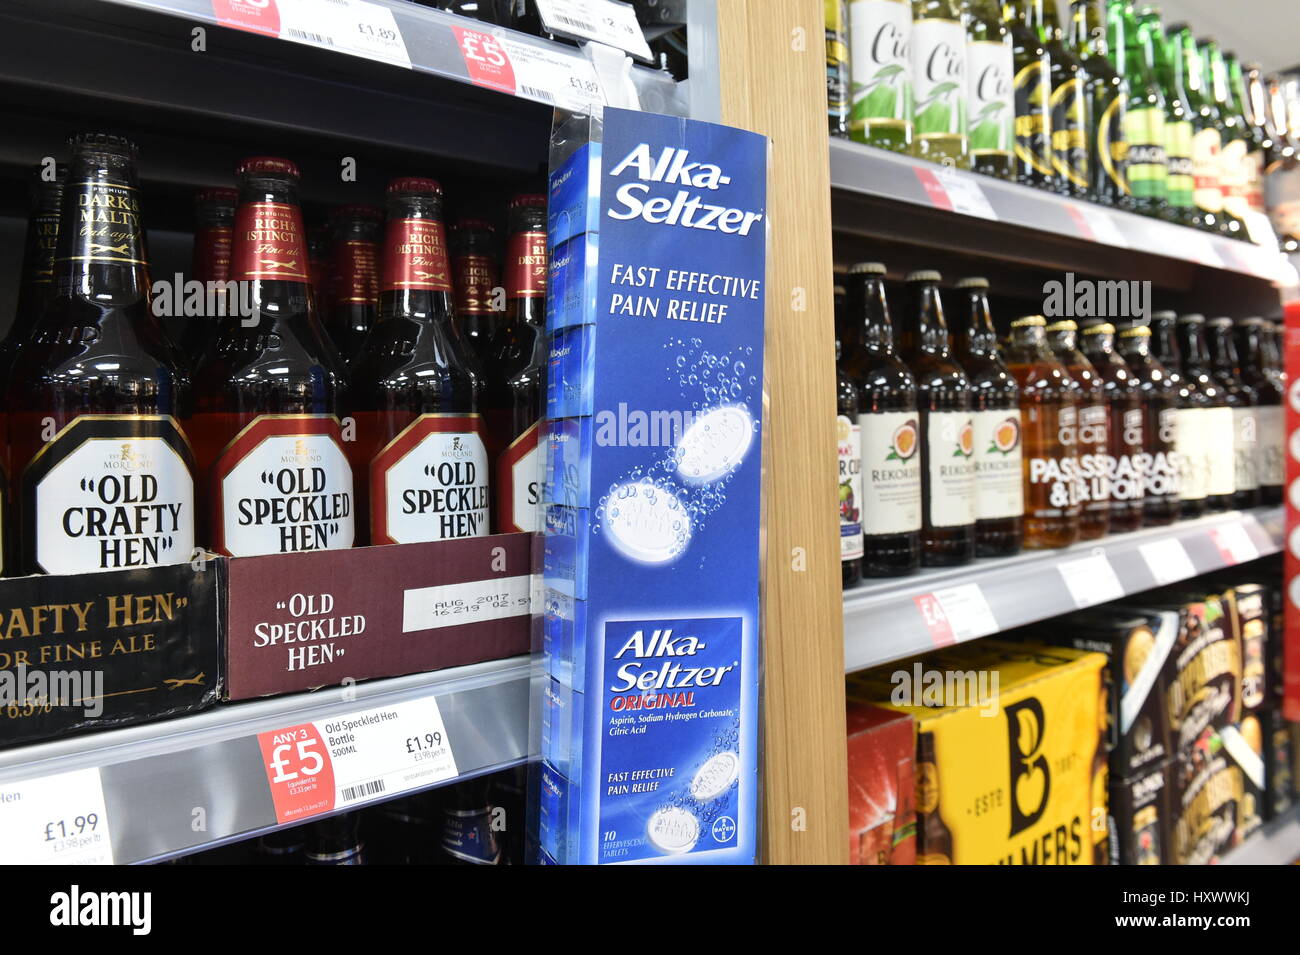 Beer and Alka Selzter on Sale in Aldi Supermarket Christmas excess Stock Photo